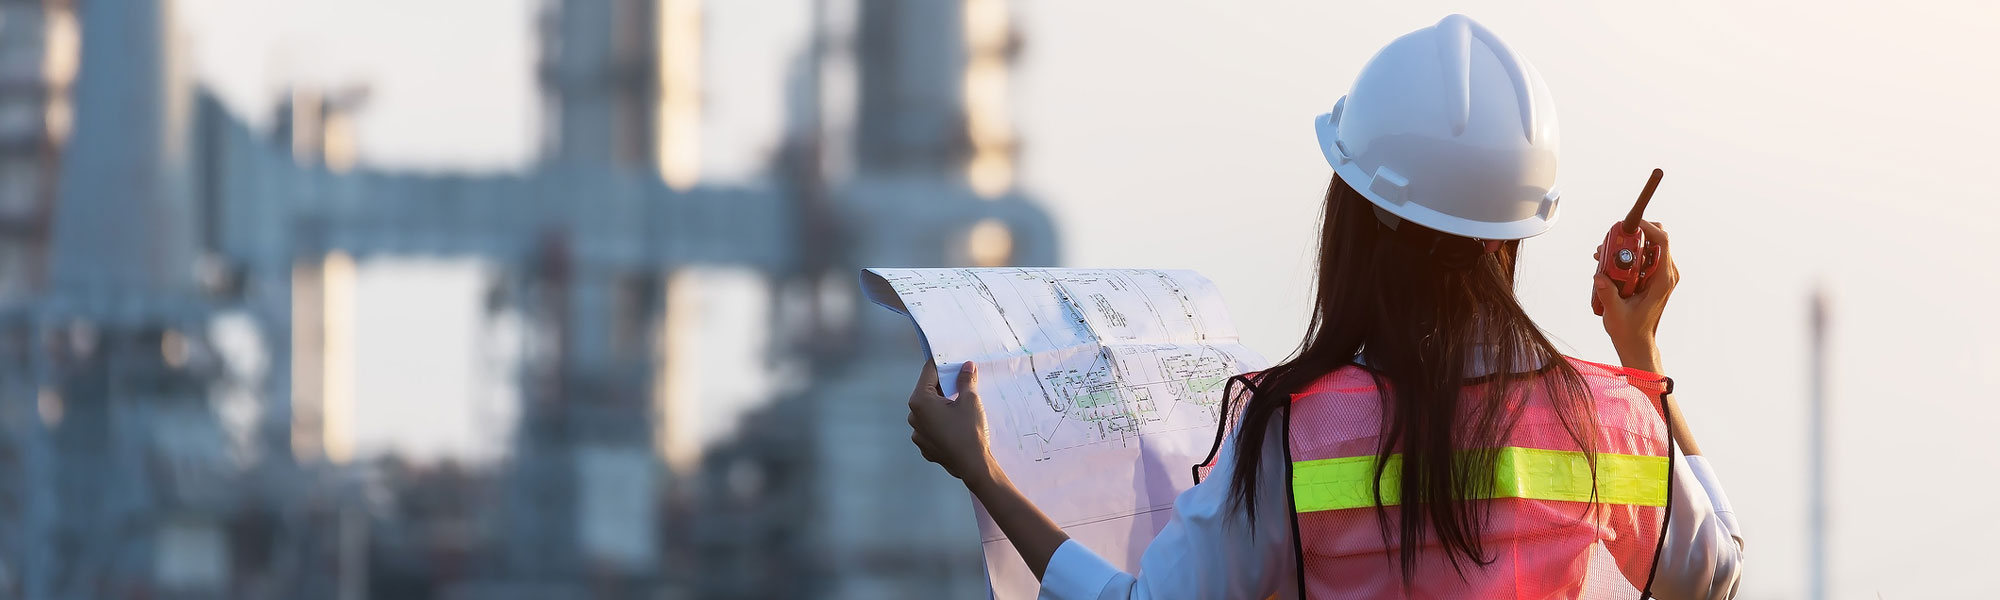 a female engineer wearing a hardhat and vest, holds a walkie talkie in one hand and a large piece of paper with plans in the other, facing towards a chemical plant